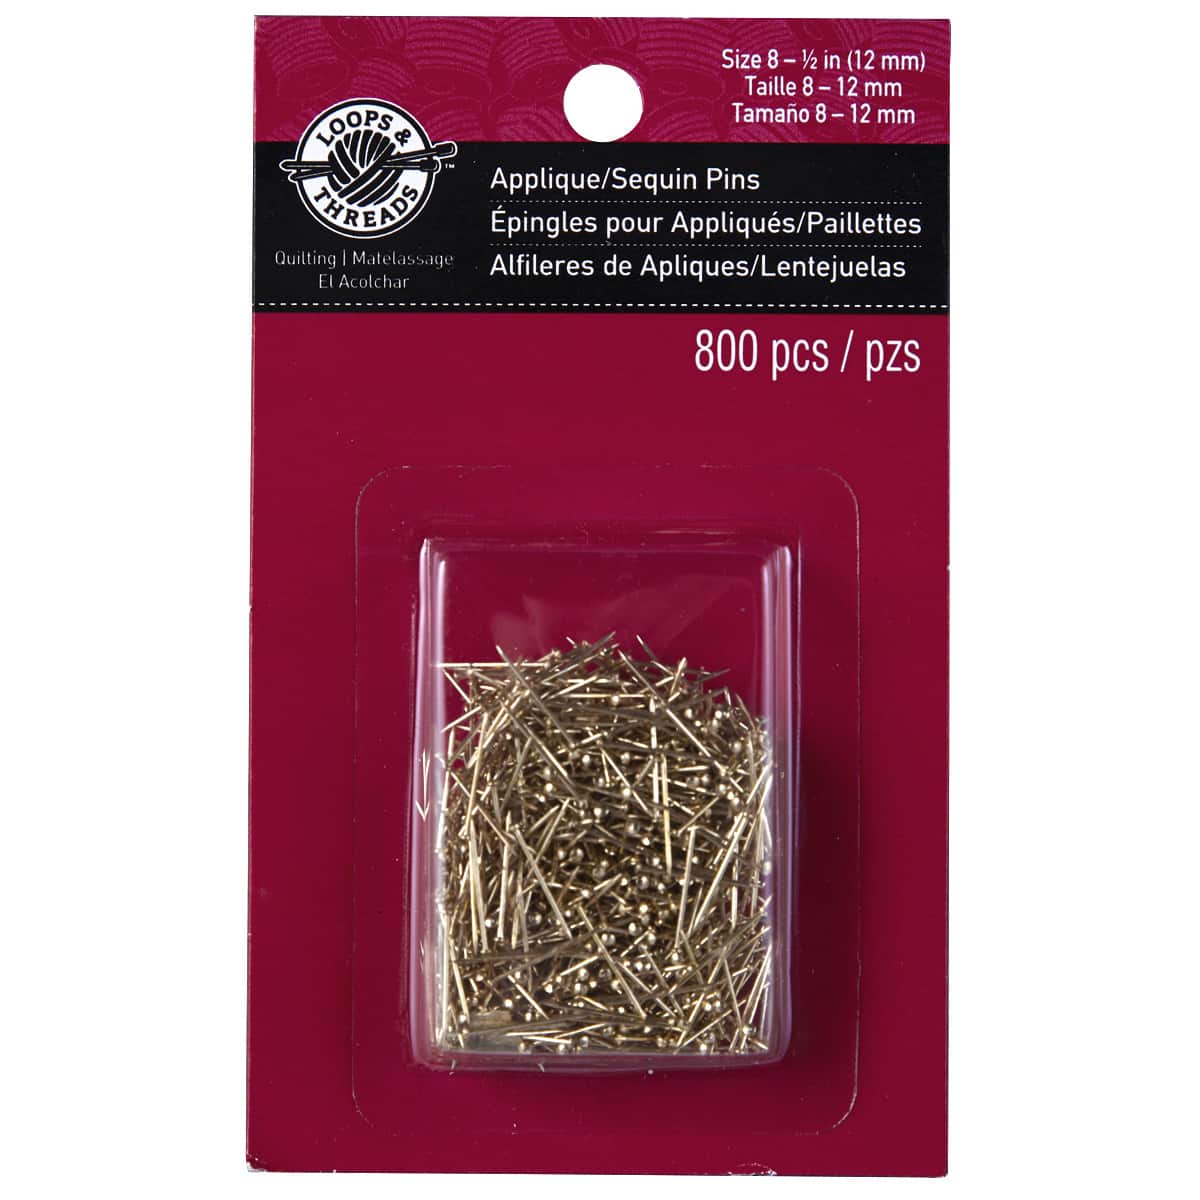 12 Packs: 800 ct. (9,600 total) 1/2 Brass Applique/Sequin Pins by